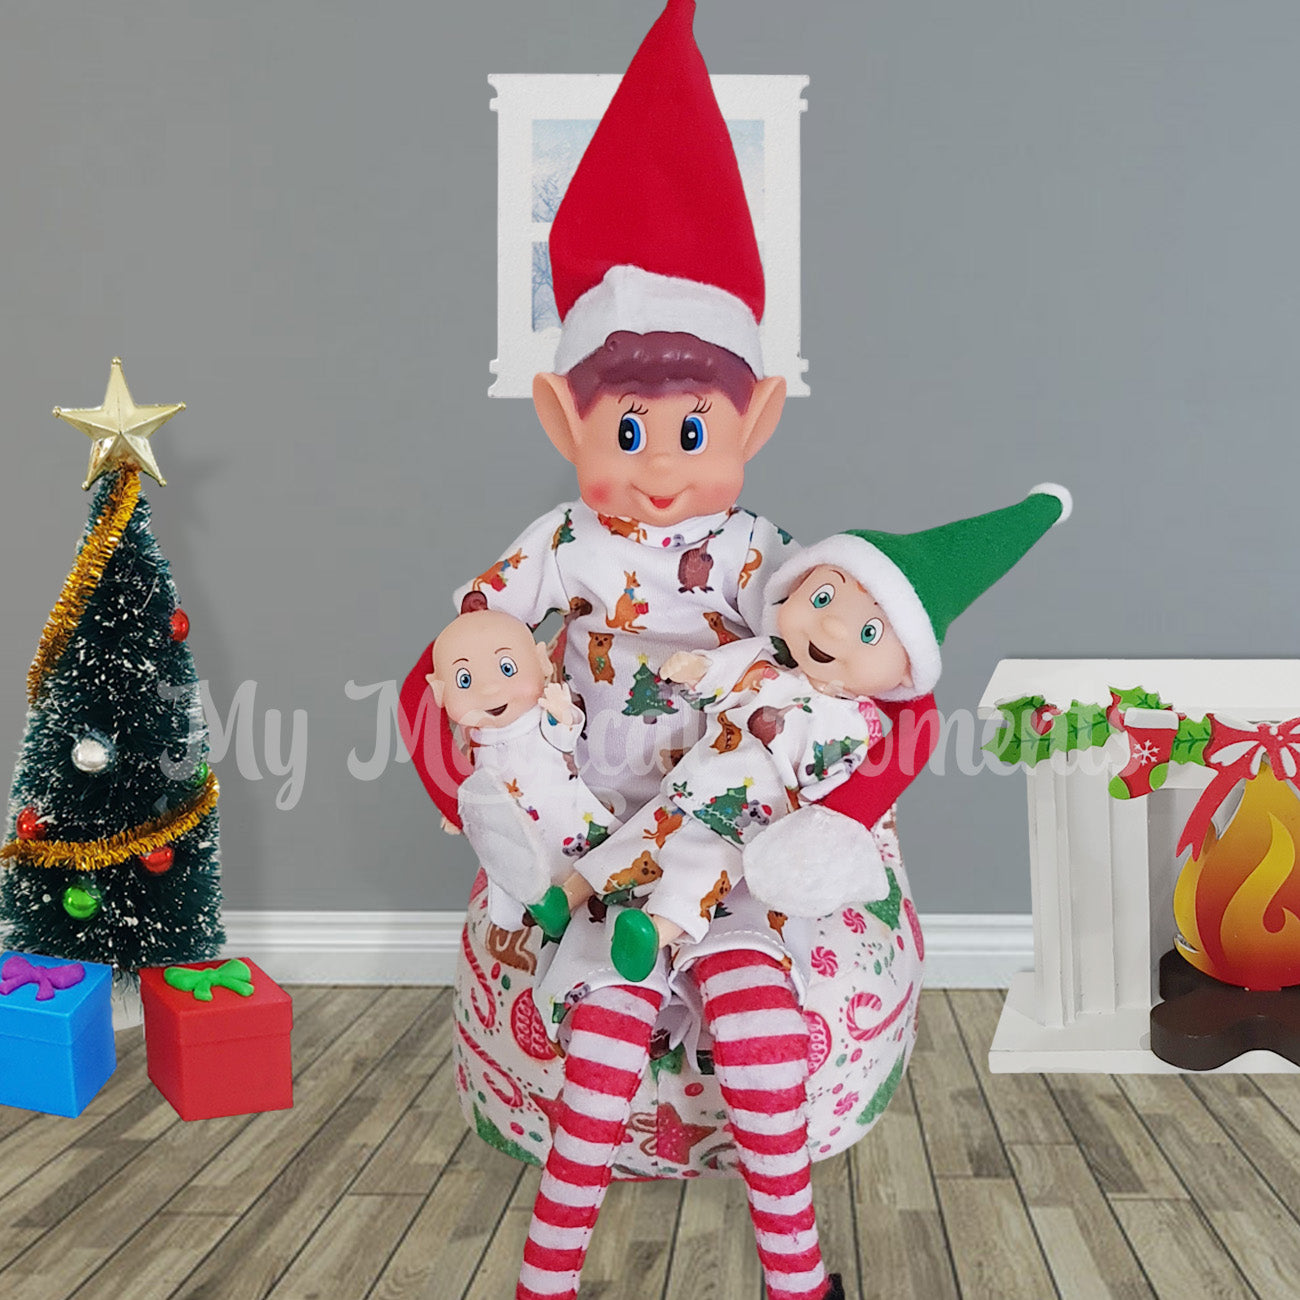 Elf family bean bag scene with fireplace and Christmas tree